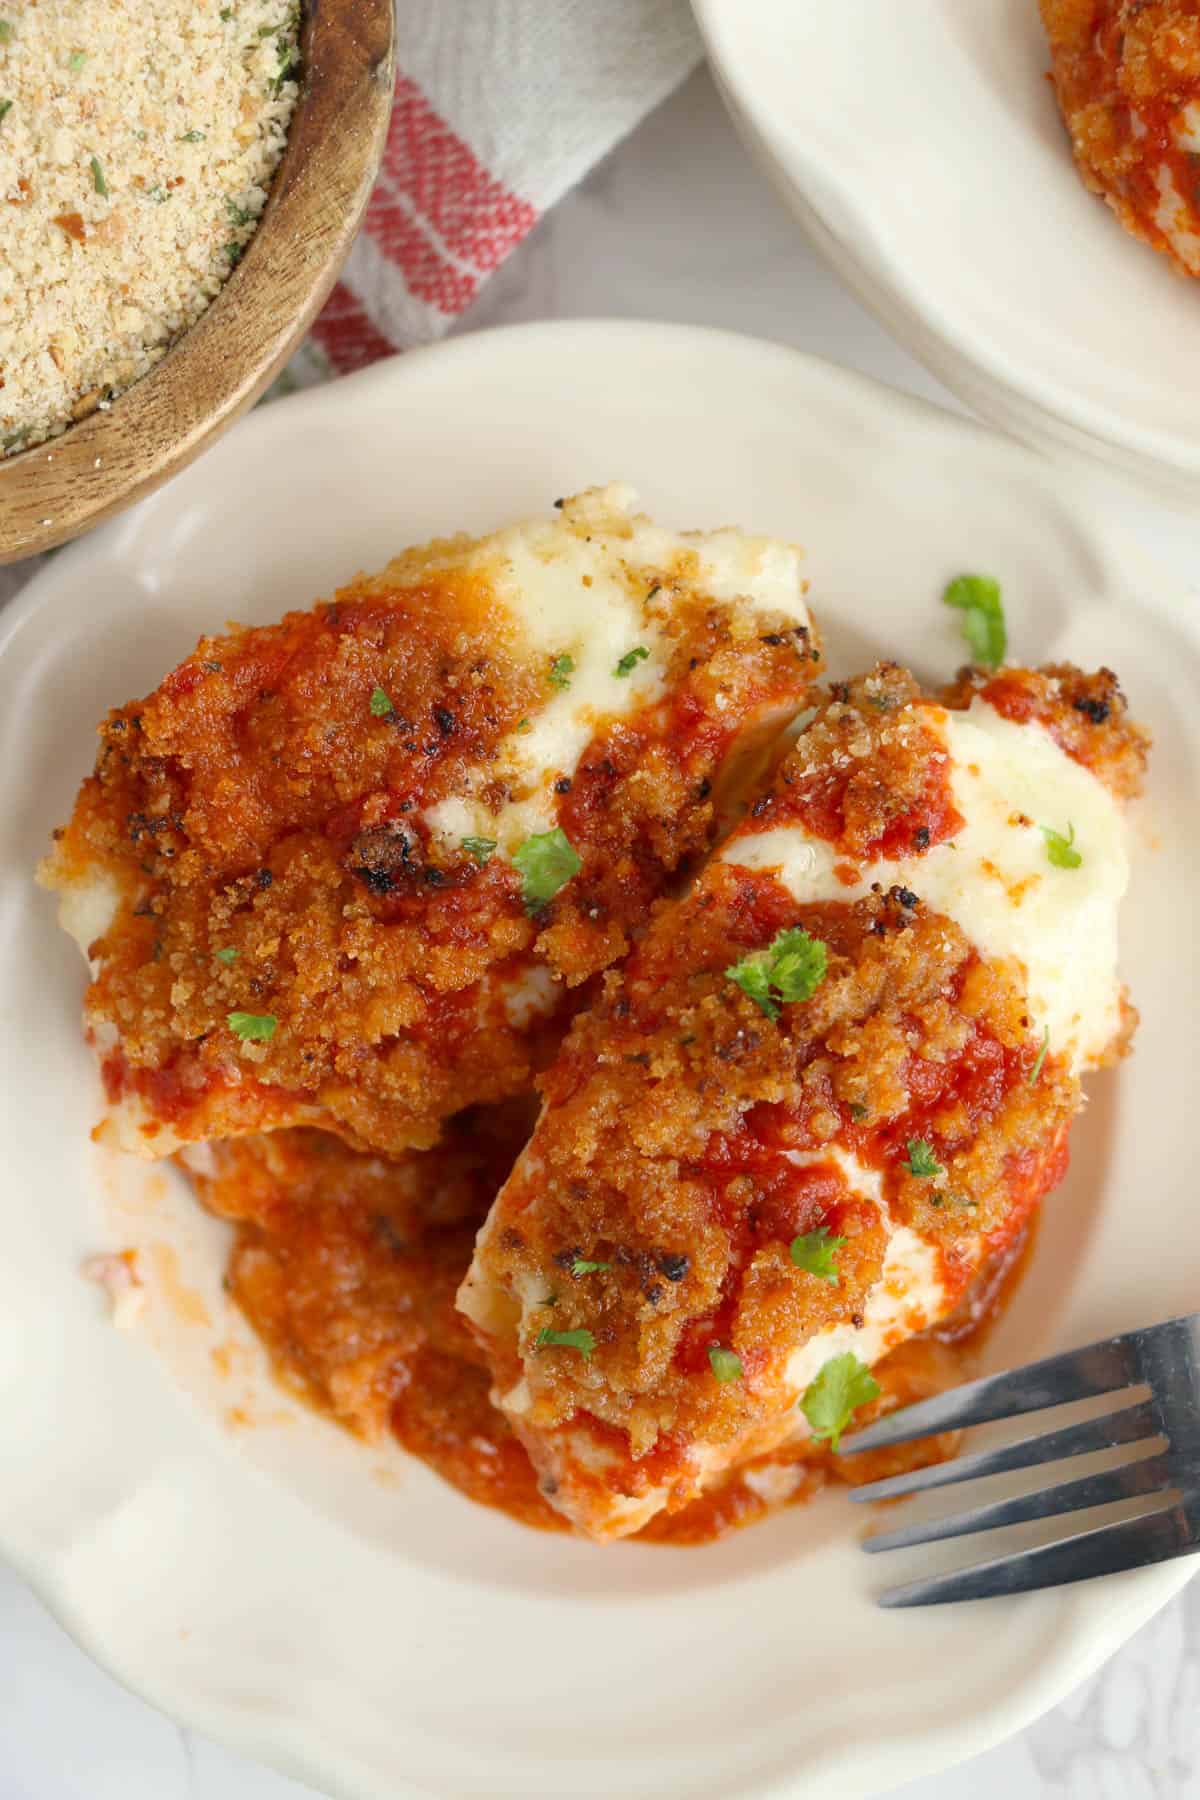 An overheat image of stuffed pasta shells with cheese, breadcrumb topping, and marinara sauce.